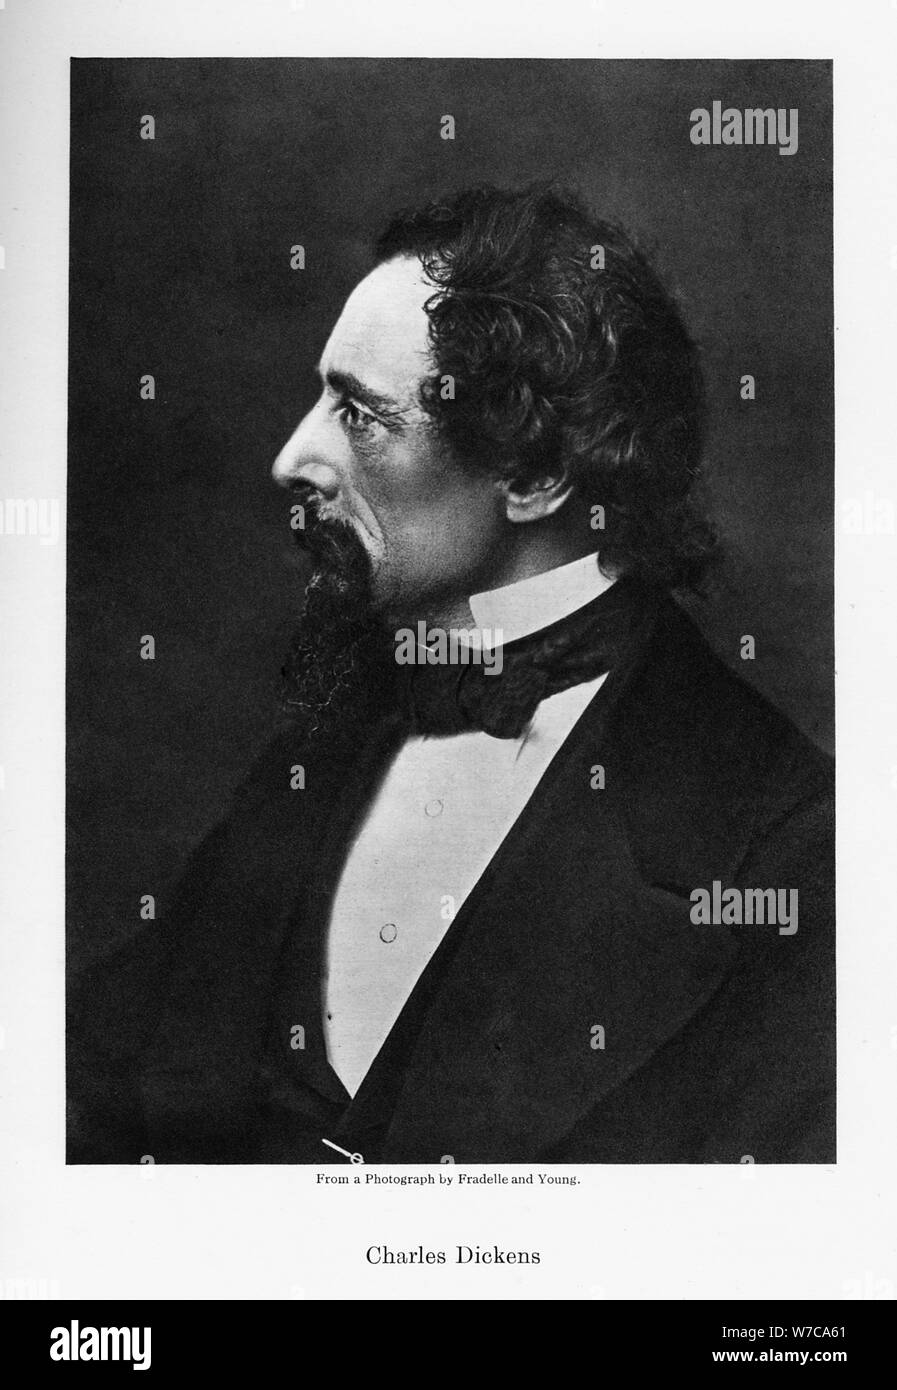 Charles Dickens, romanziere inglese, c1860s.Artista: Fradelle & Young Foto Stock